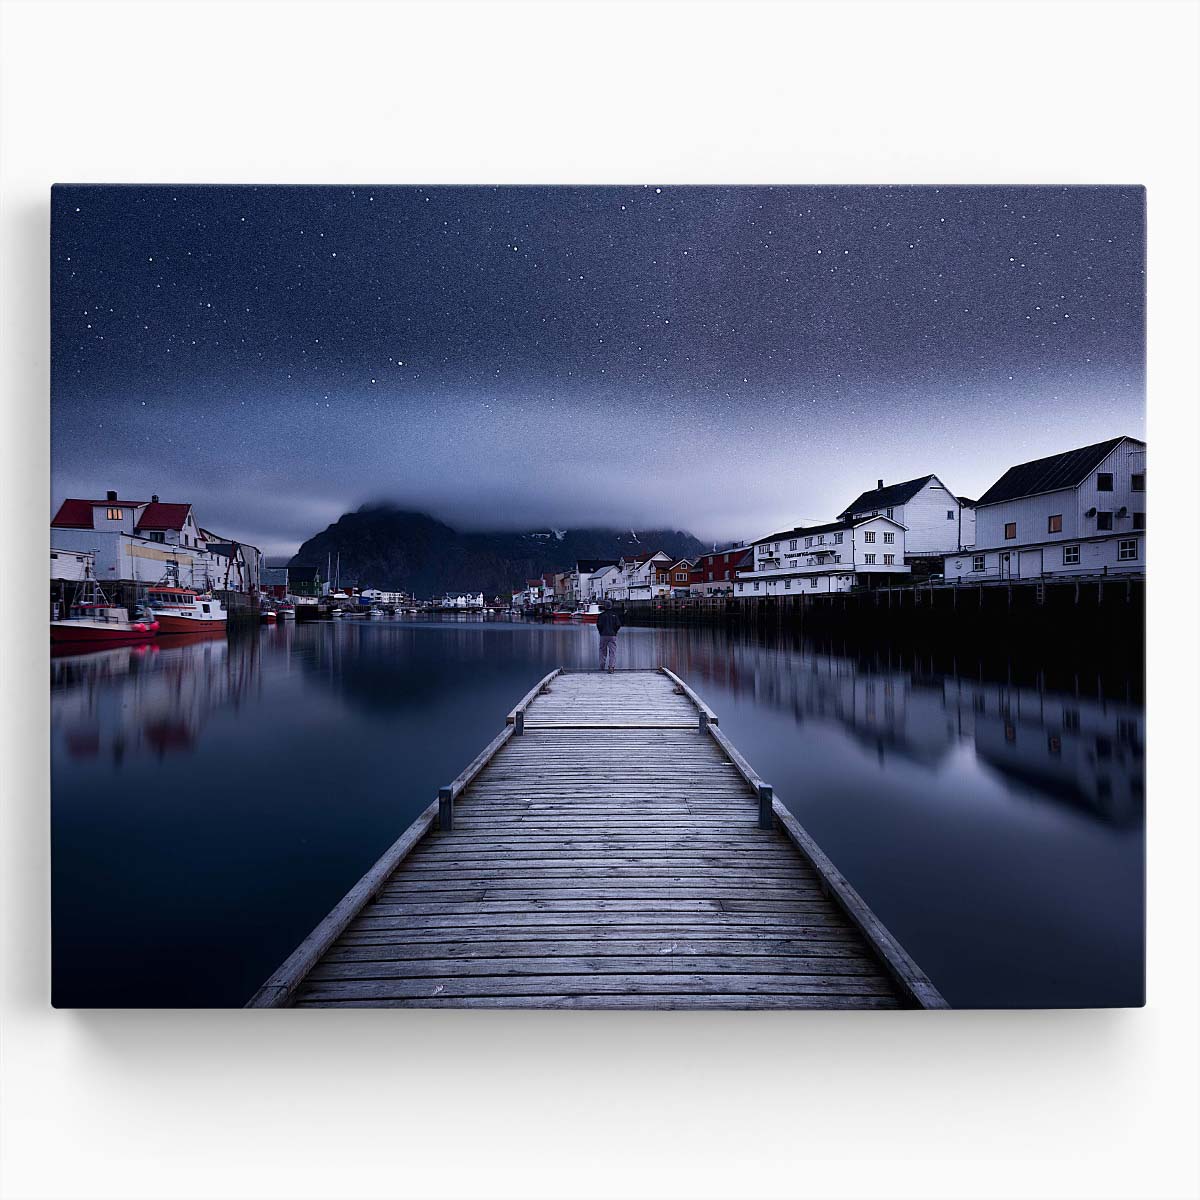 Henningsvaer Norway Coastal Night Sky Harbor Wall Art by Luxuriance Designs. Made in USA.